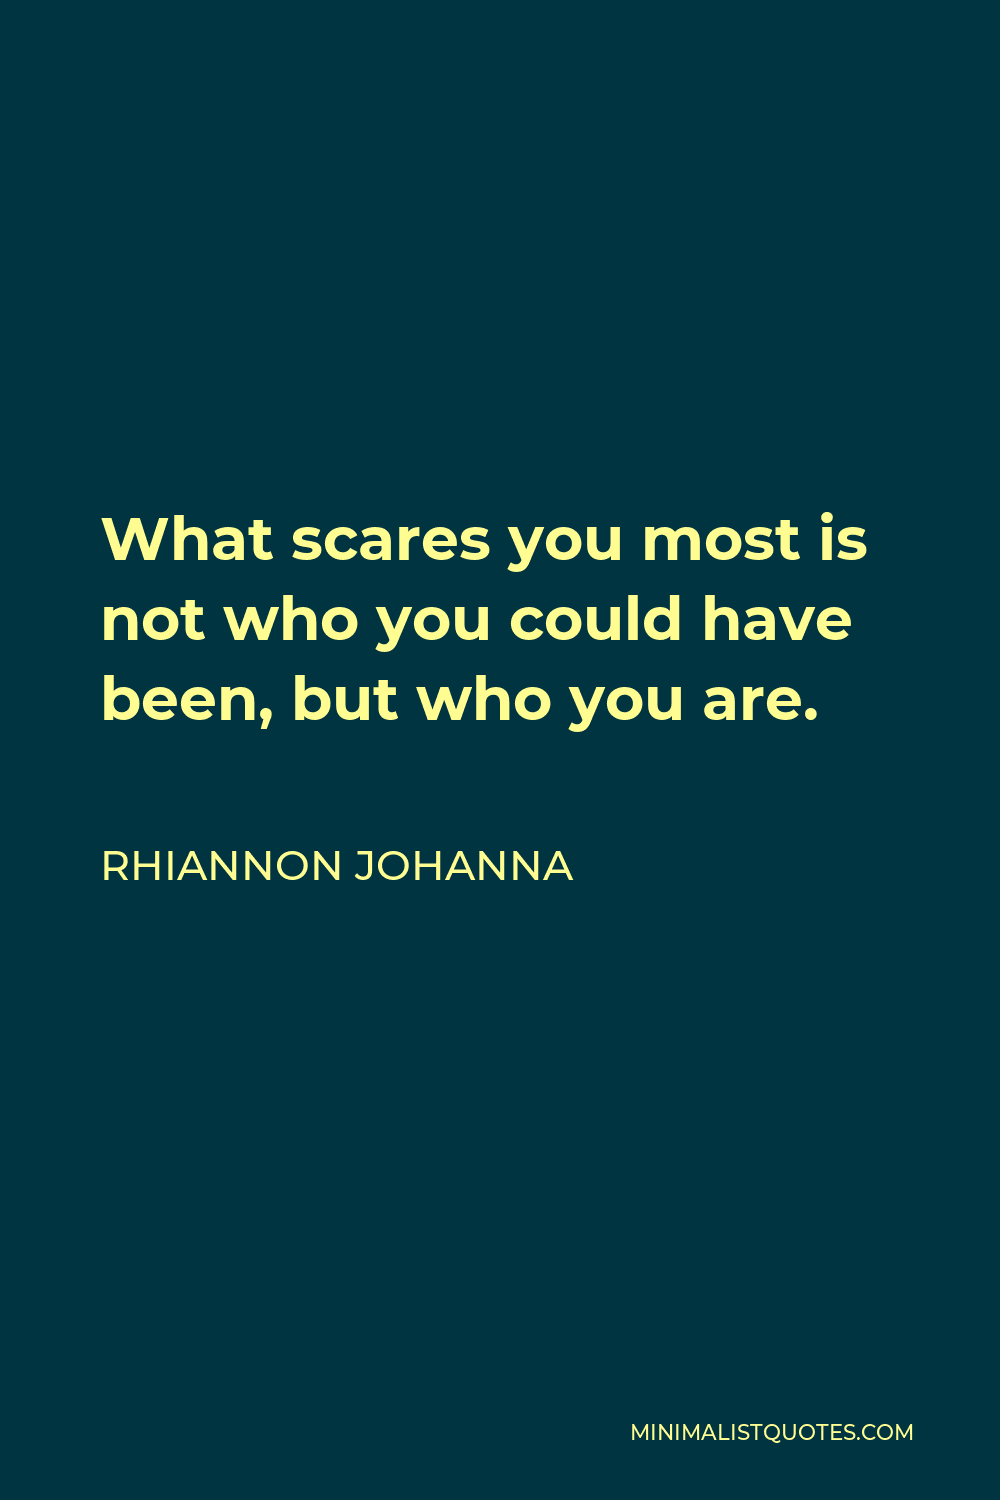 Rhiannon Johanna Quote - What scares you most is not who you could have been, but who you are.